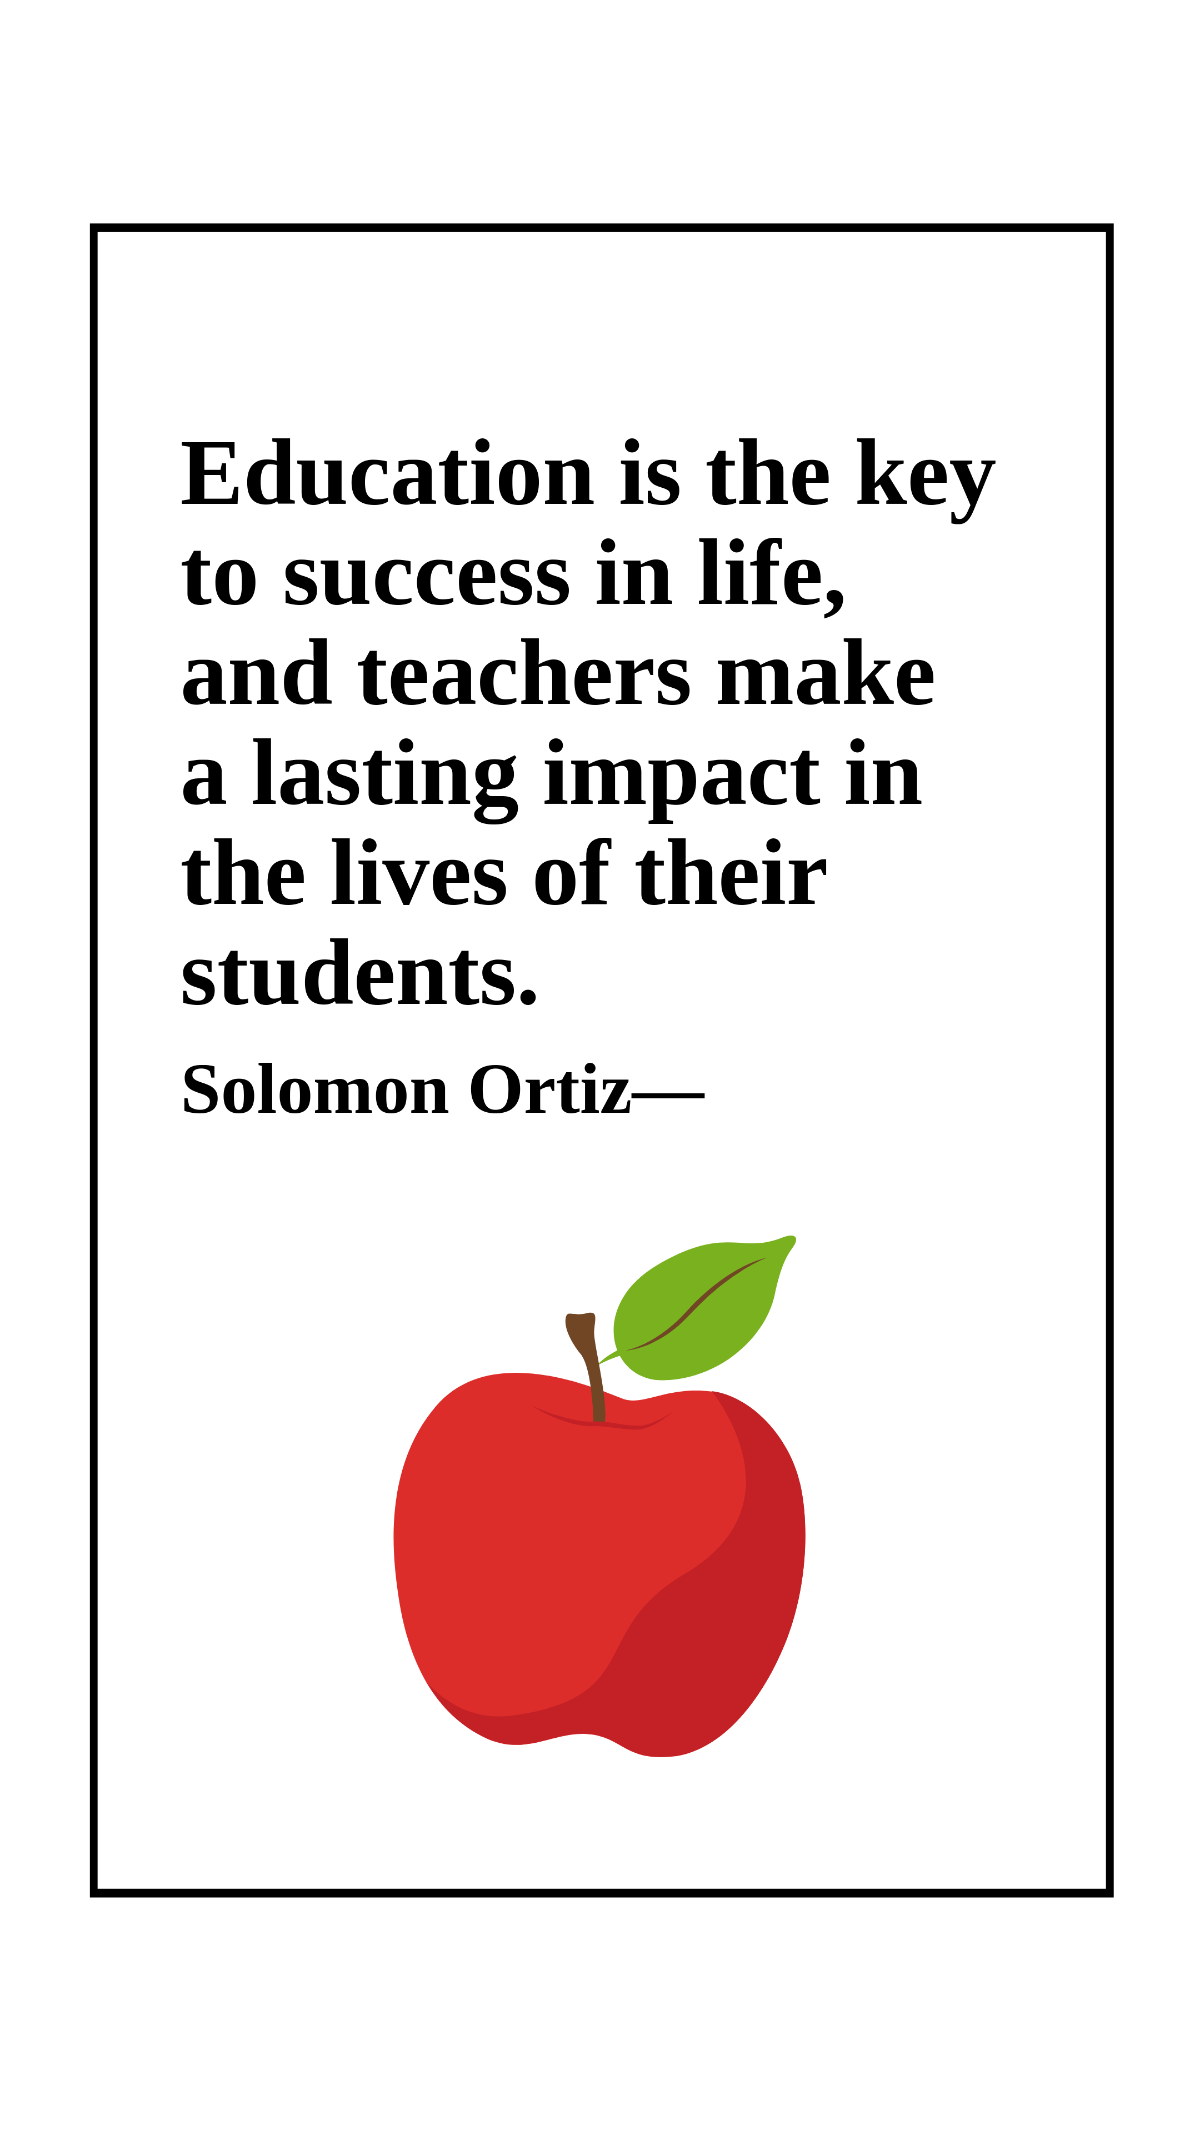 Solomon Ortiz - Education is the key to success in life, and teachers make a lasting impact in the lives of their students. Template